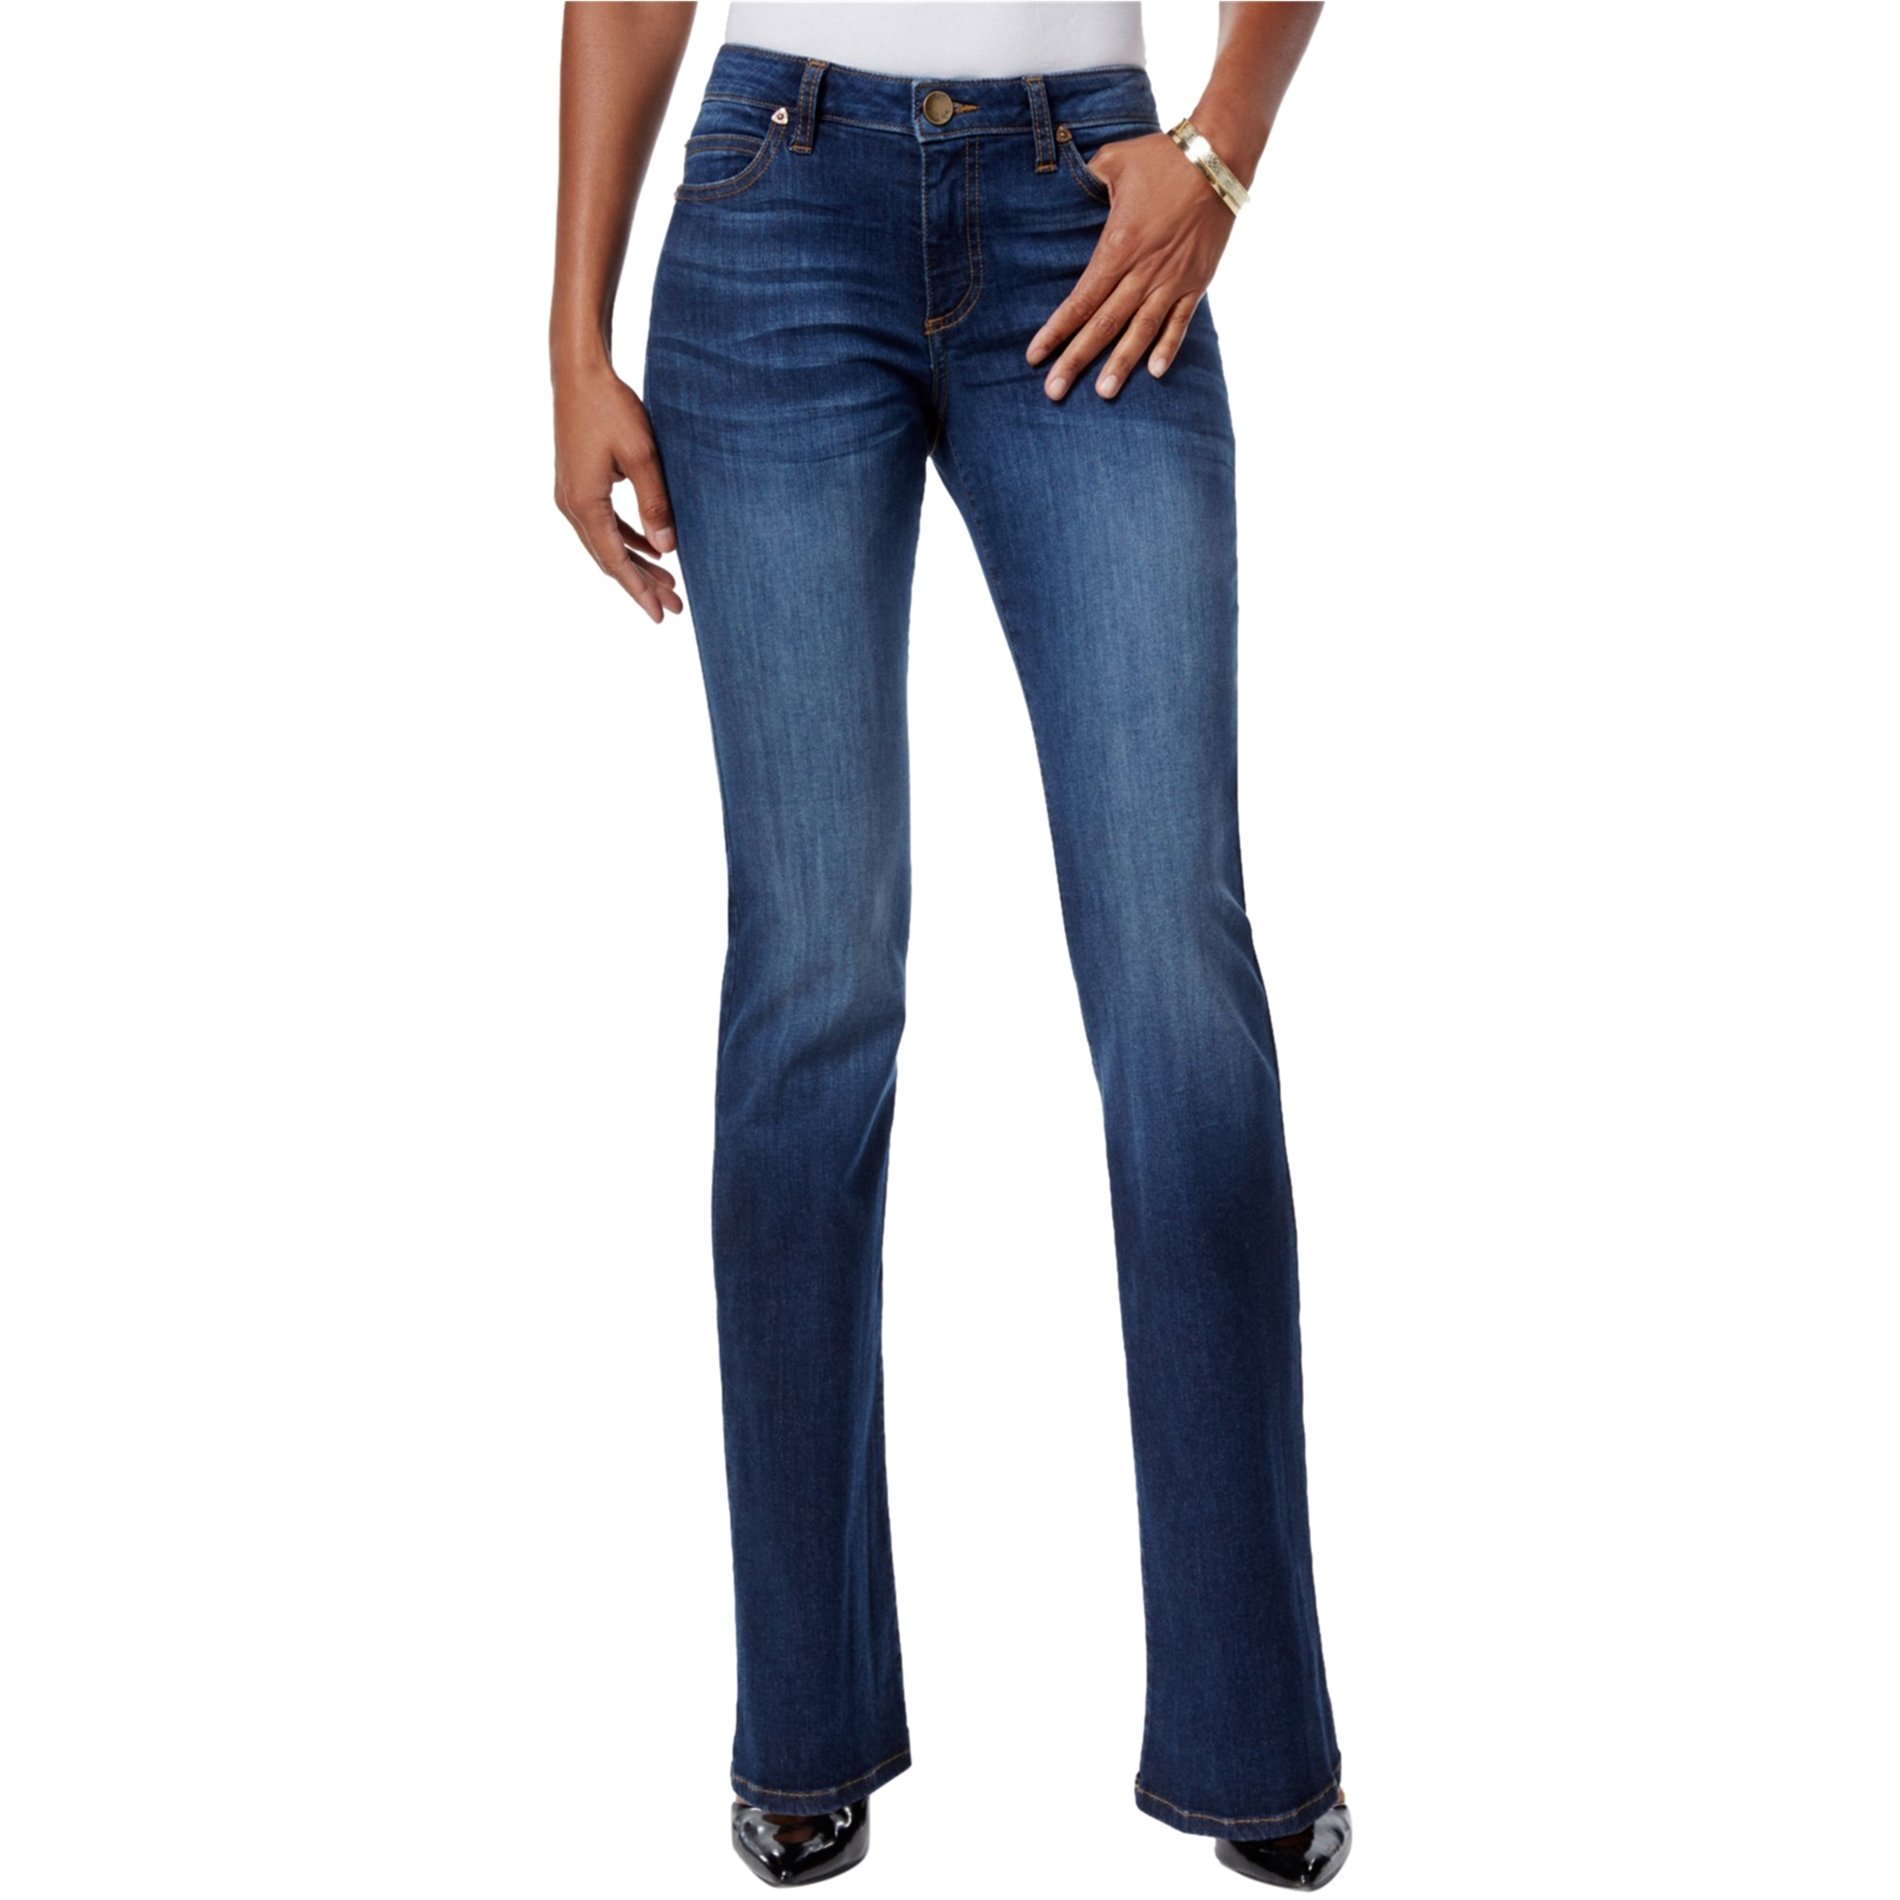 Kut From The Kloth Womens Natalie Boot Cut Jeans